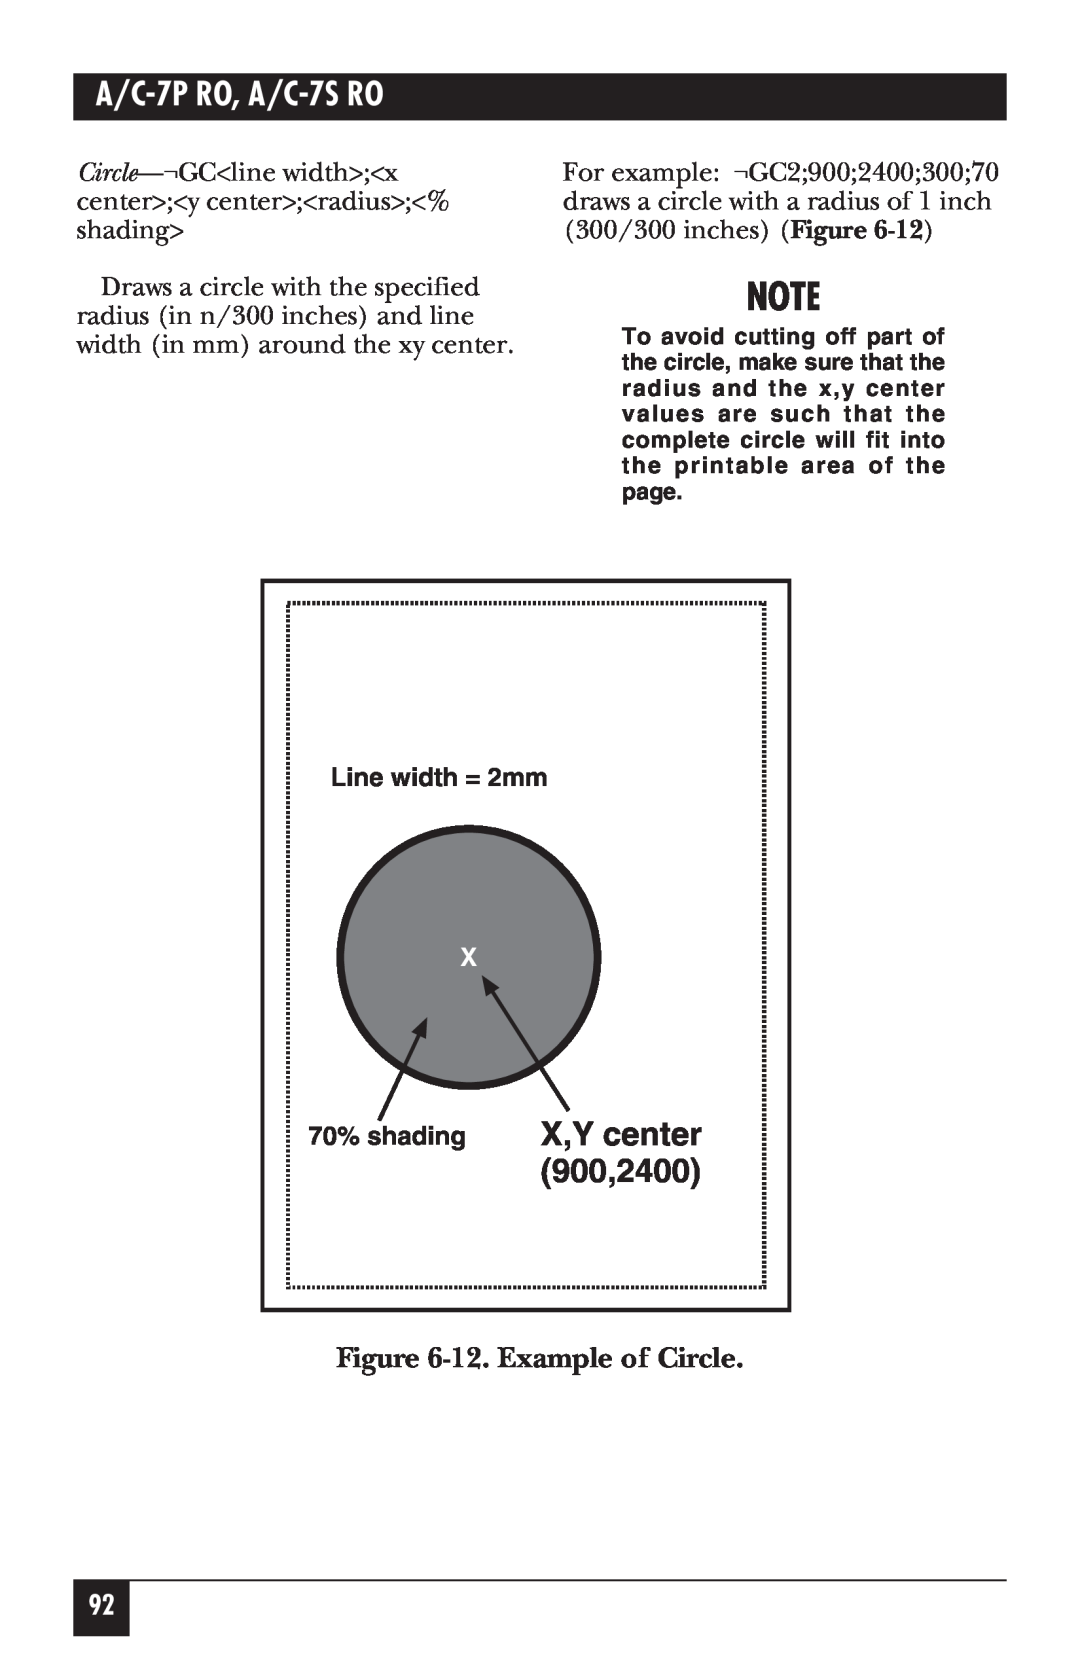 Black Box manual X,Y center, 900,2400, 12. Example of Circle, Line width = 2mm, 70% shading, A/C-7P RO, A/C-7S RO 